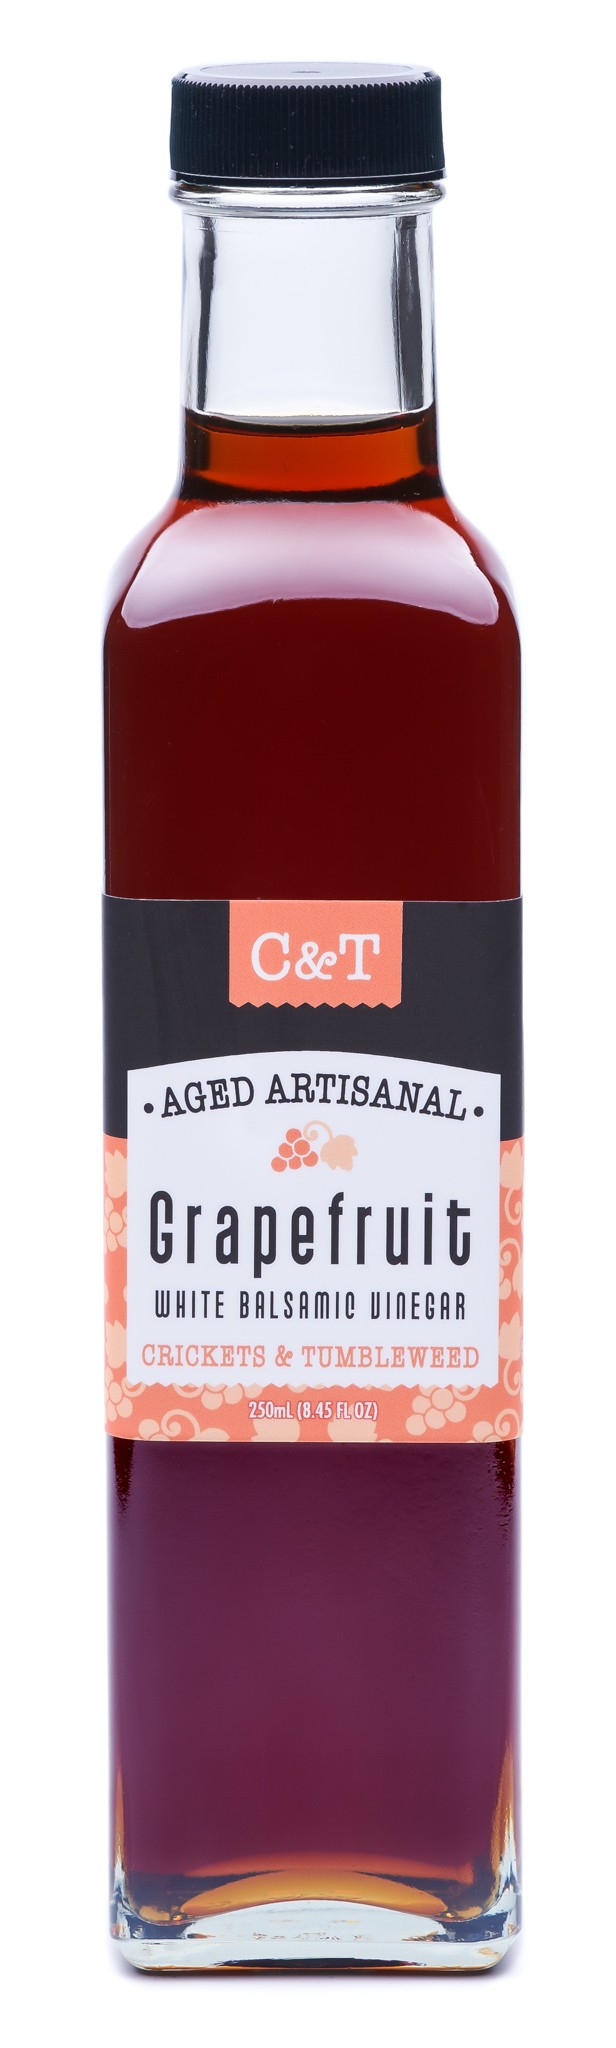 Product Image for C&T Balsamic Grapefruit